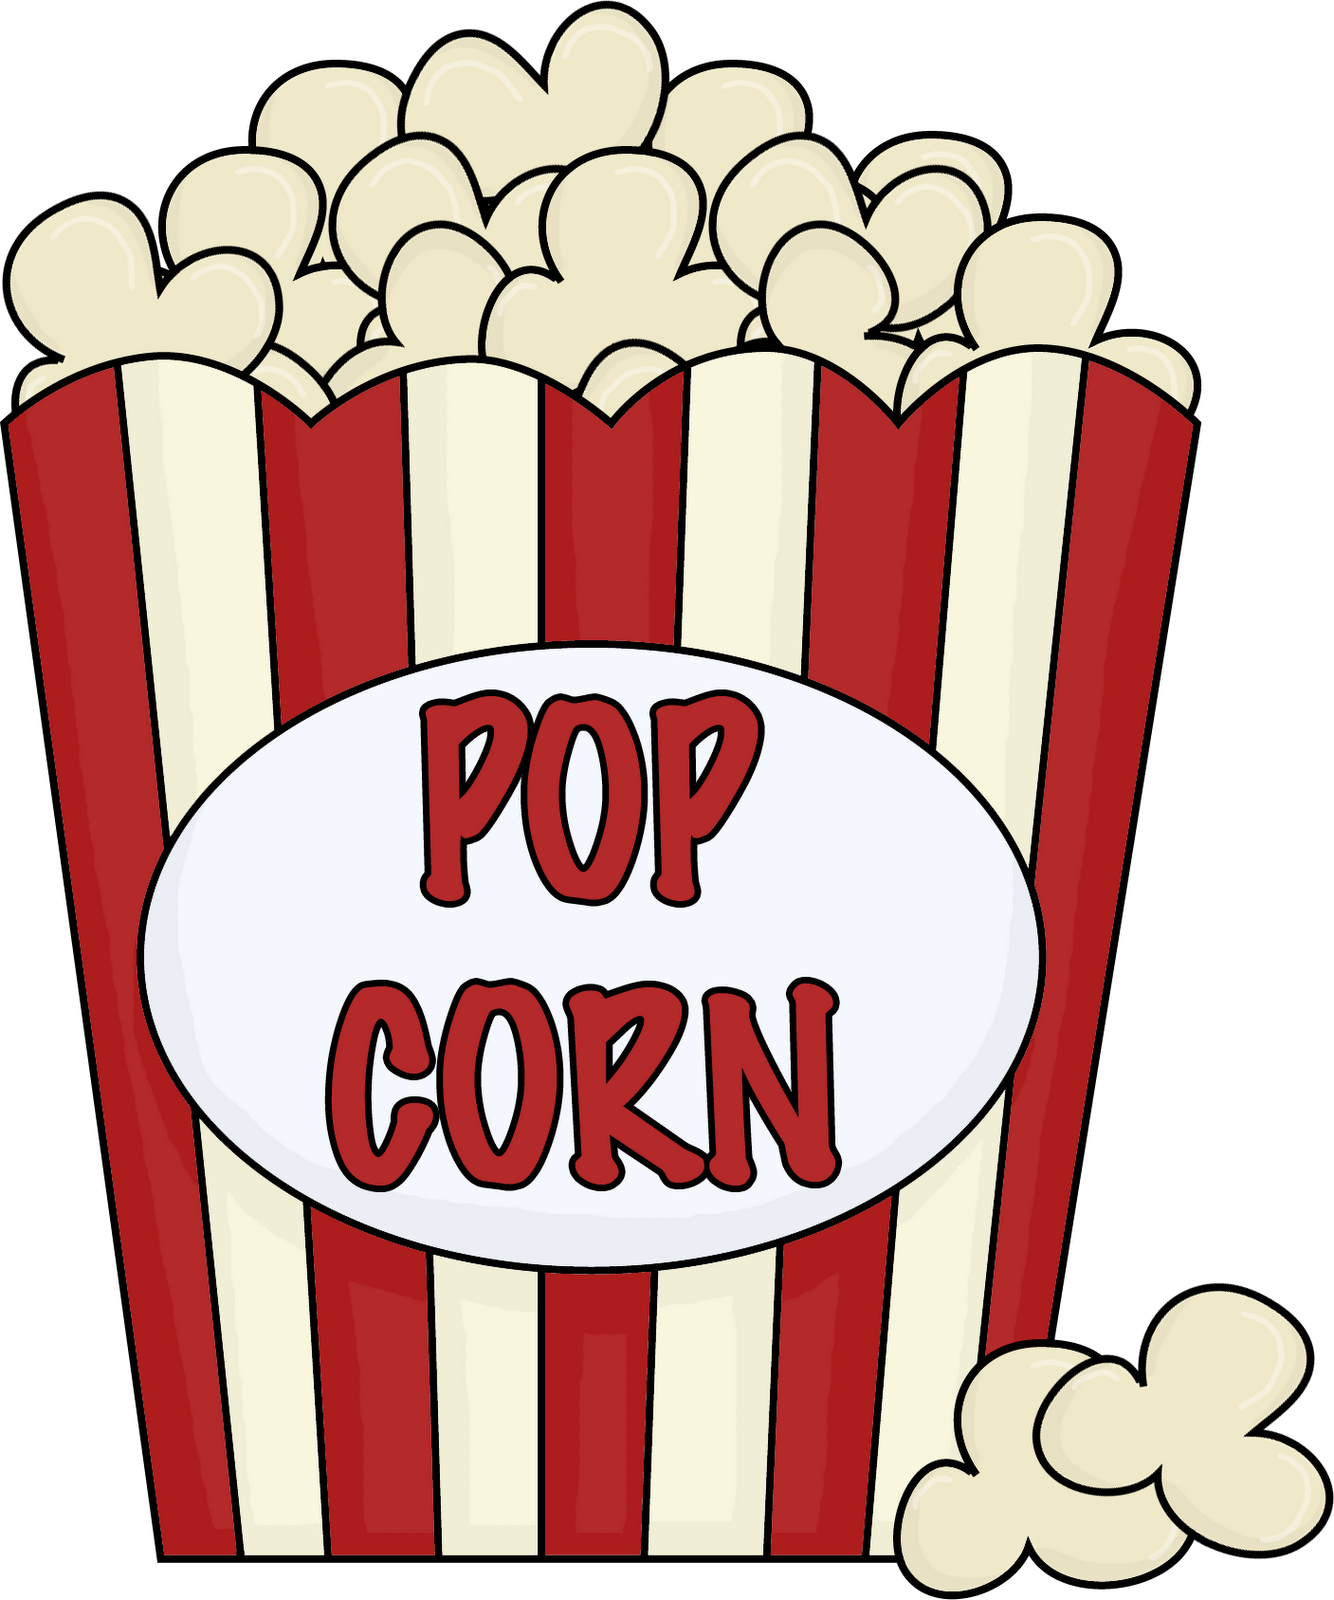 Popcorn Clip Art Images | Clipart library - Free Clipart Images